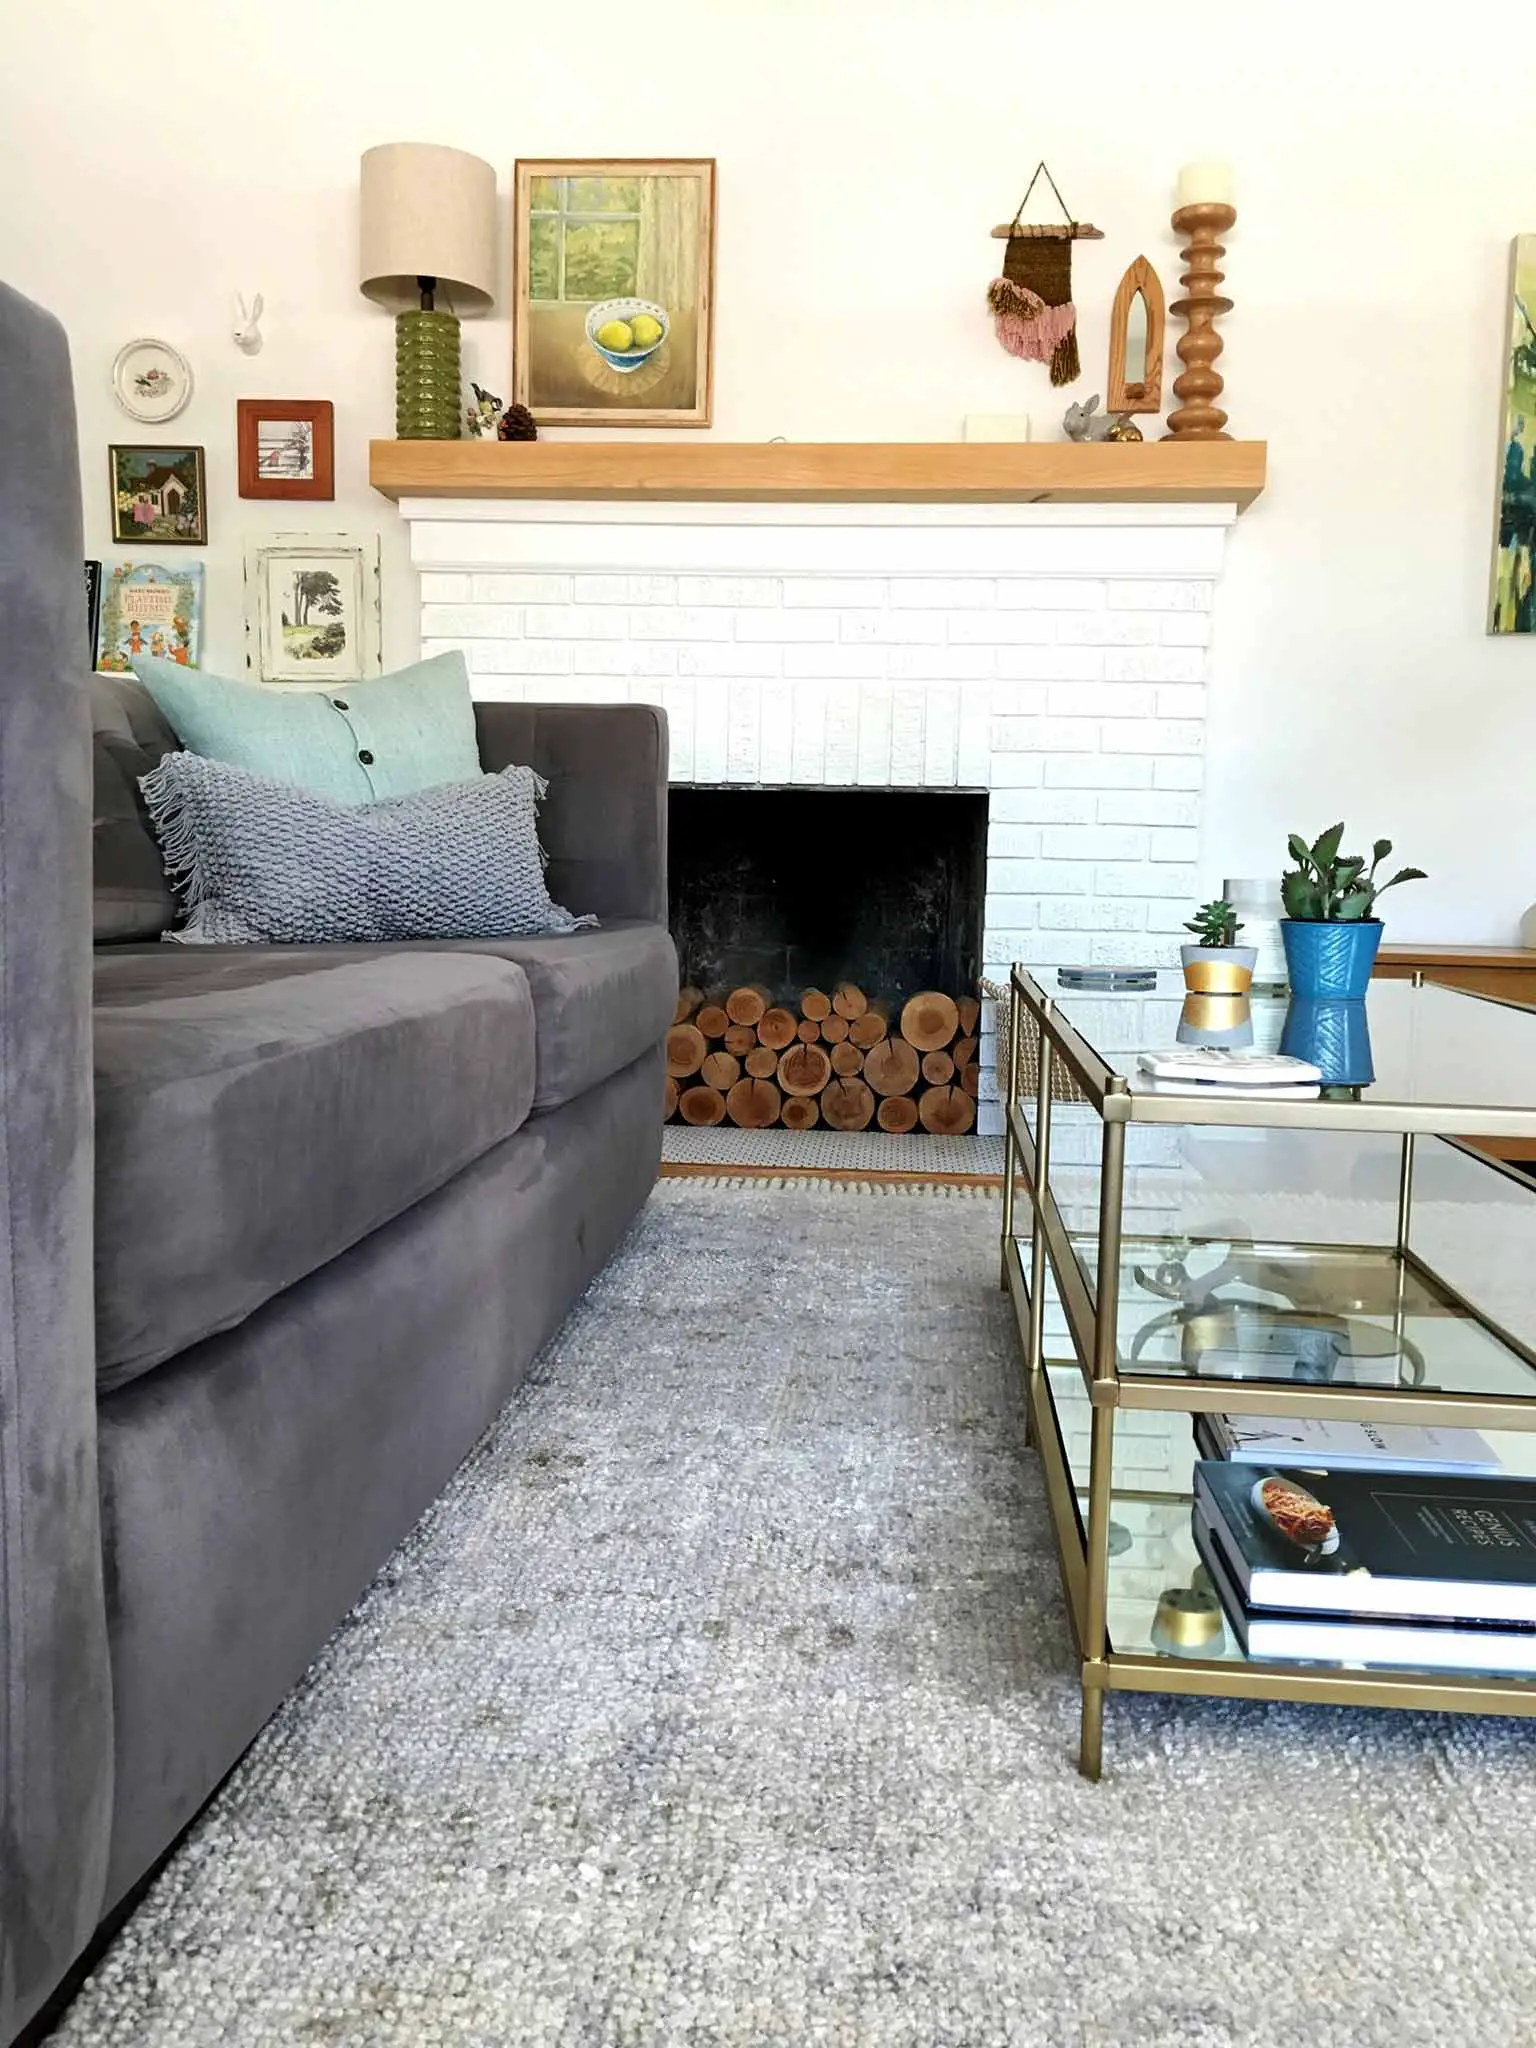 Living room after the refresh | layered rugs, glass coffee table, textured throw pillows, succulents | That Homebird Life Blog